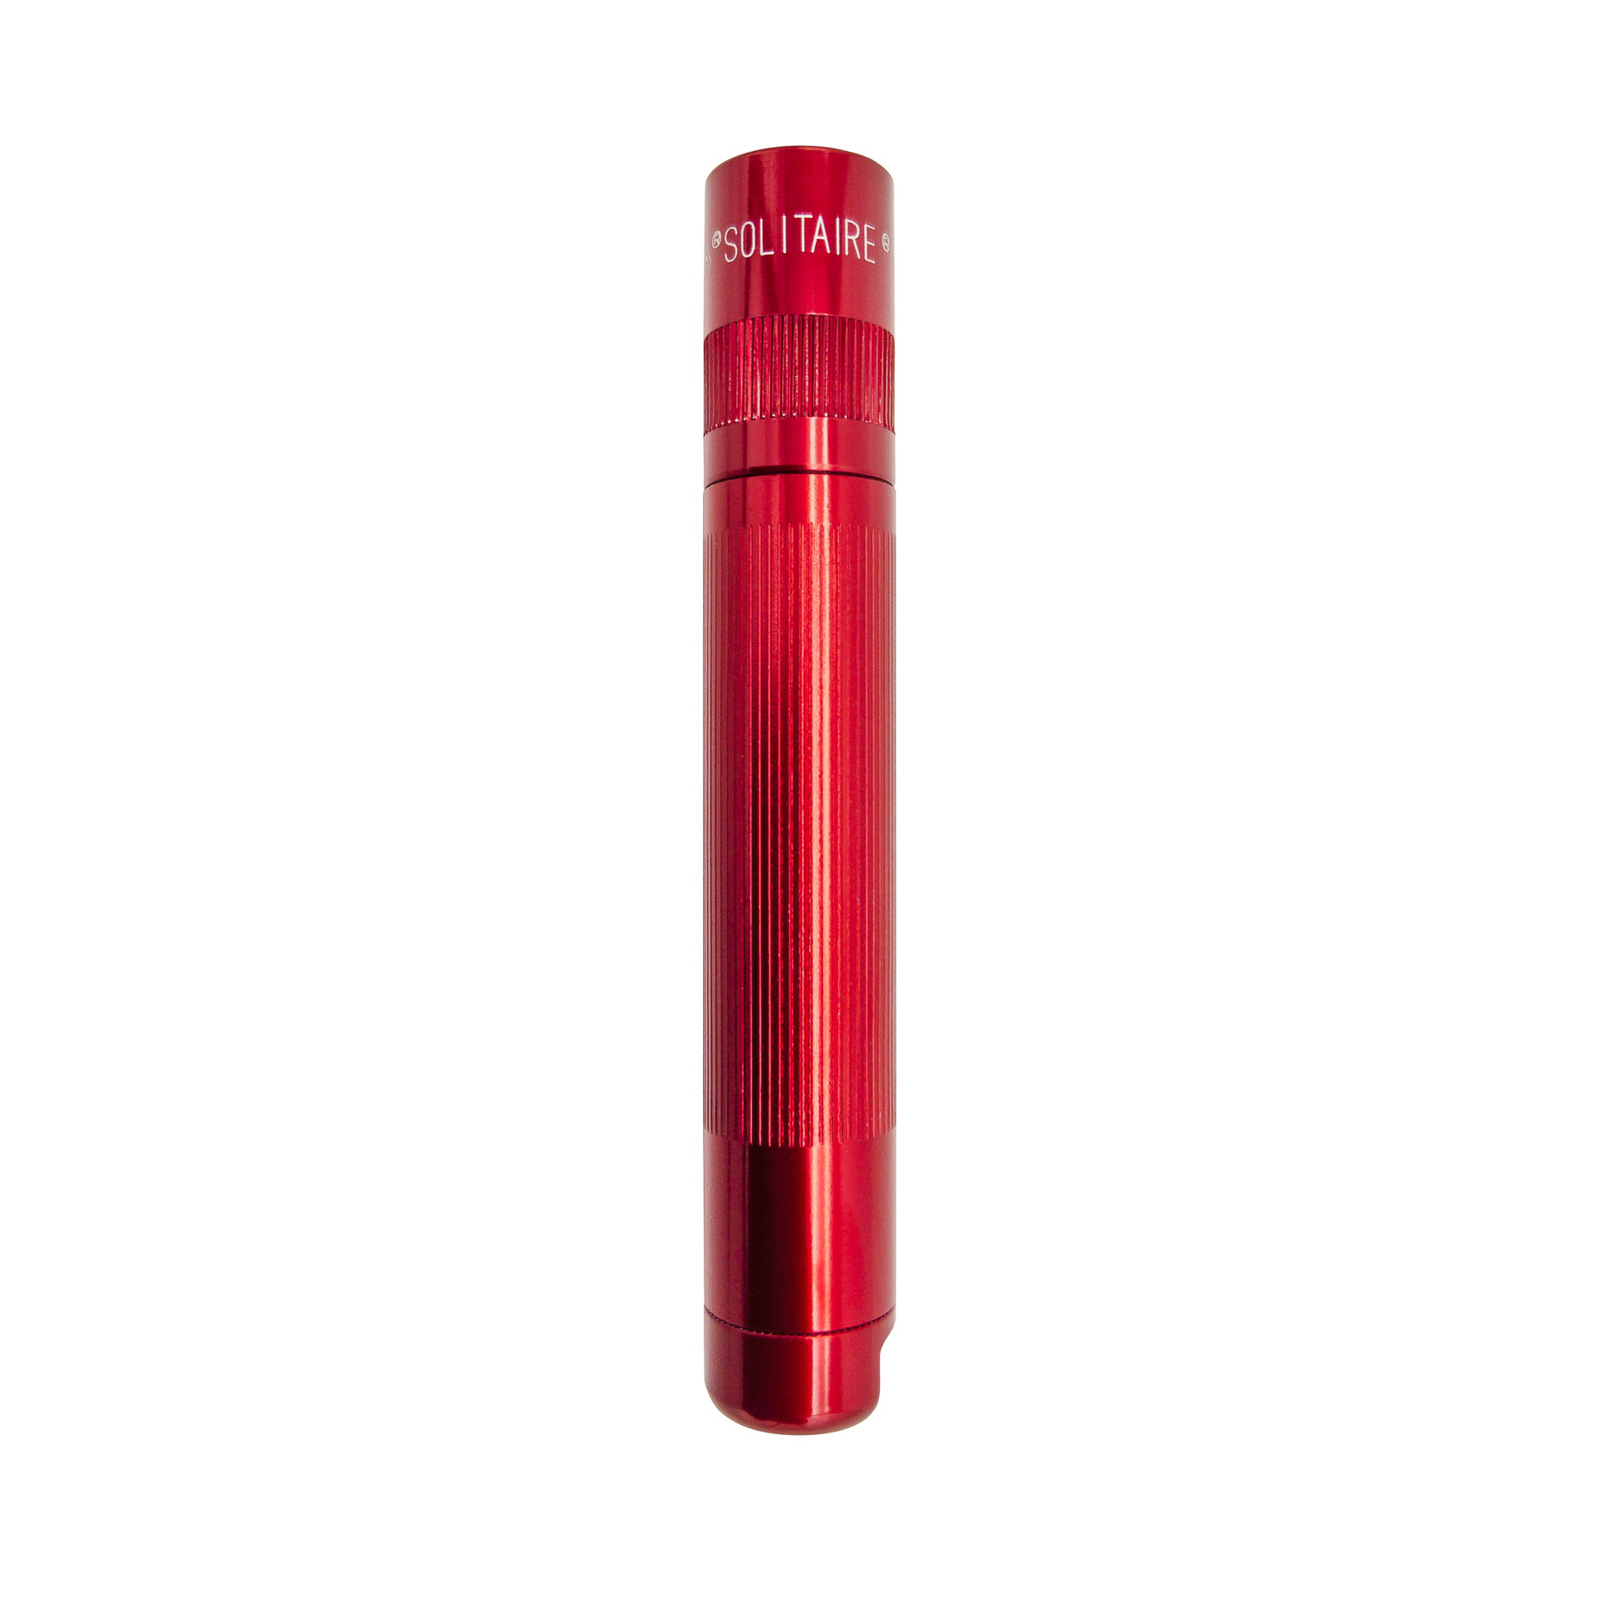 Maglite Xenon-Taschenlampe Solitaire 1-Cell AAA, Box, rot